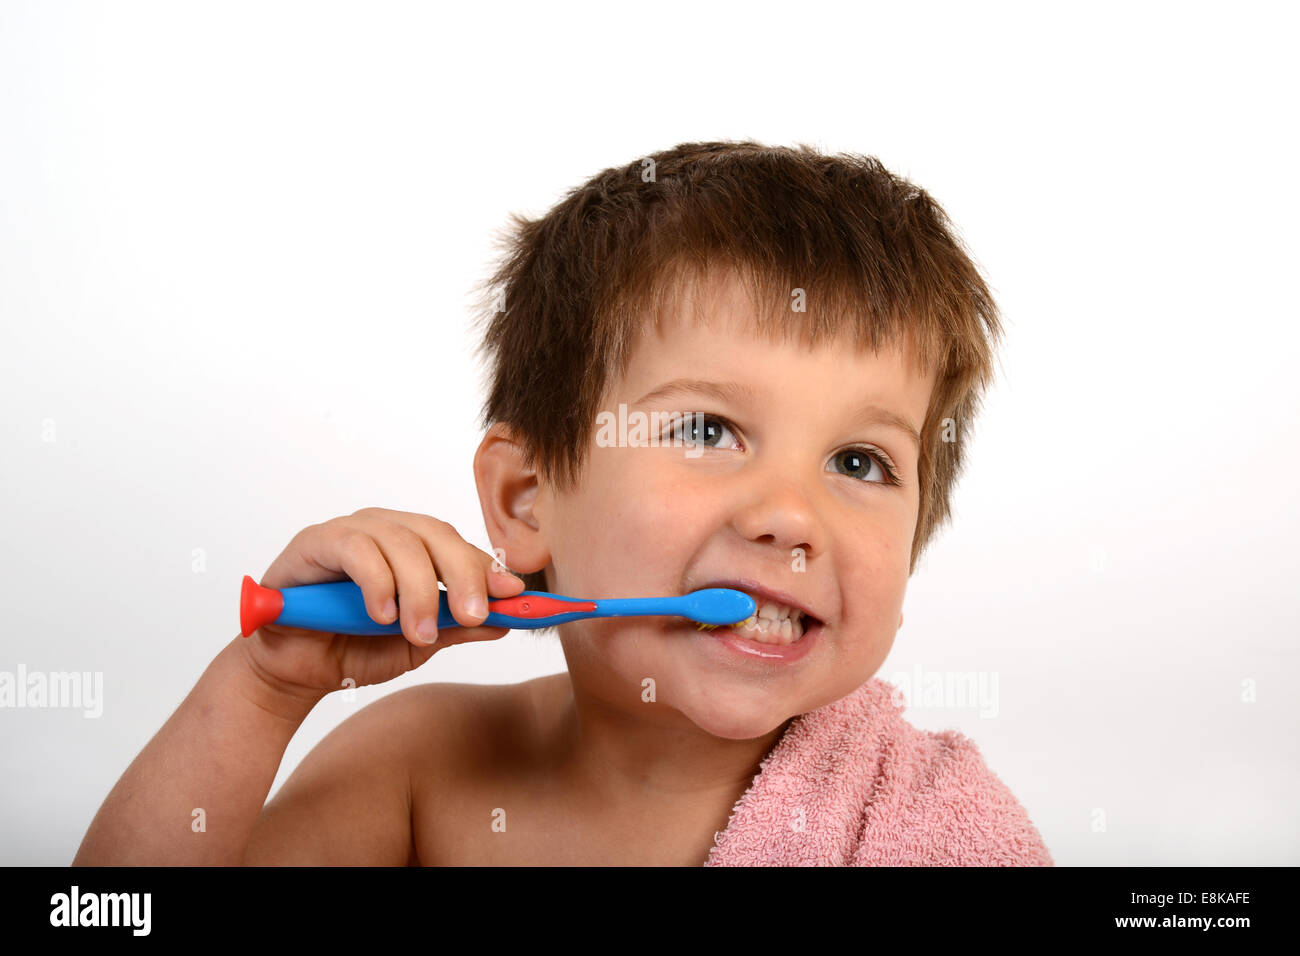 Young boy child children cleaning brushing teeth Stock Photo